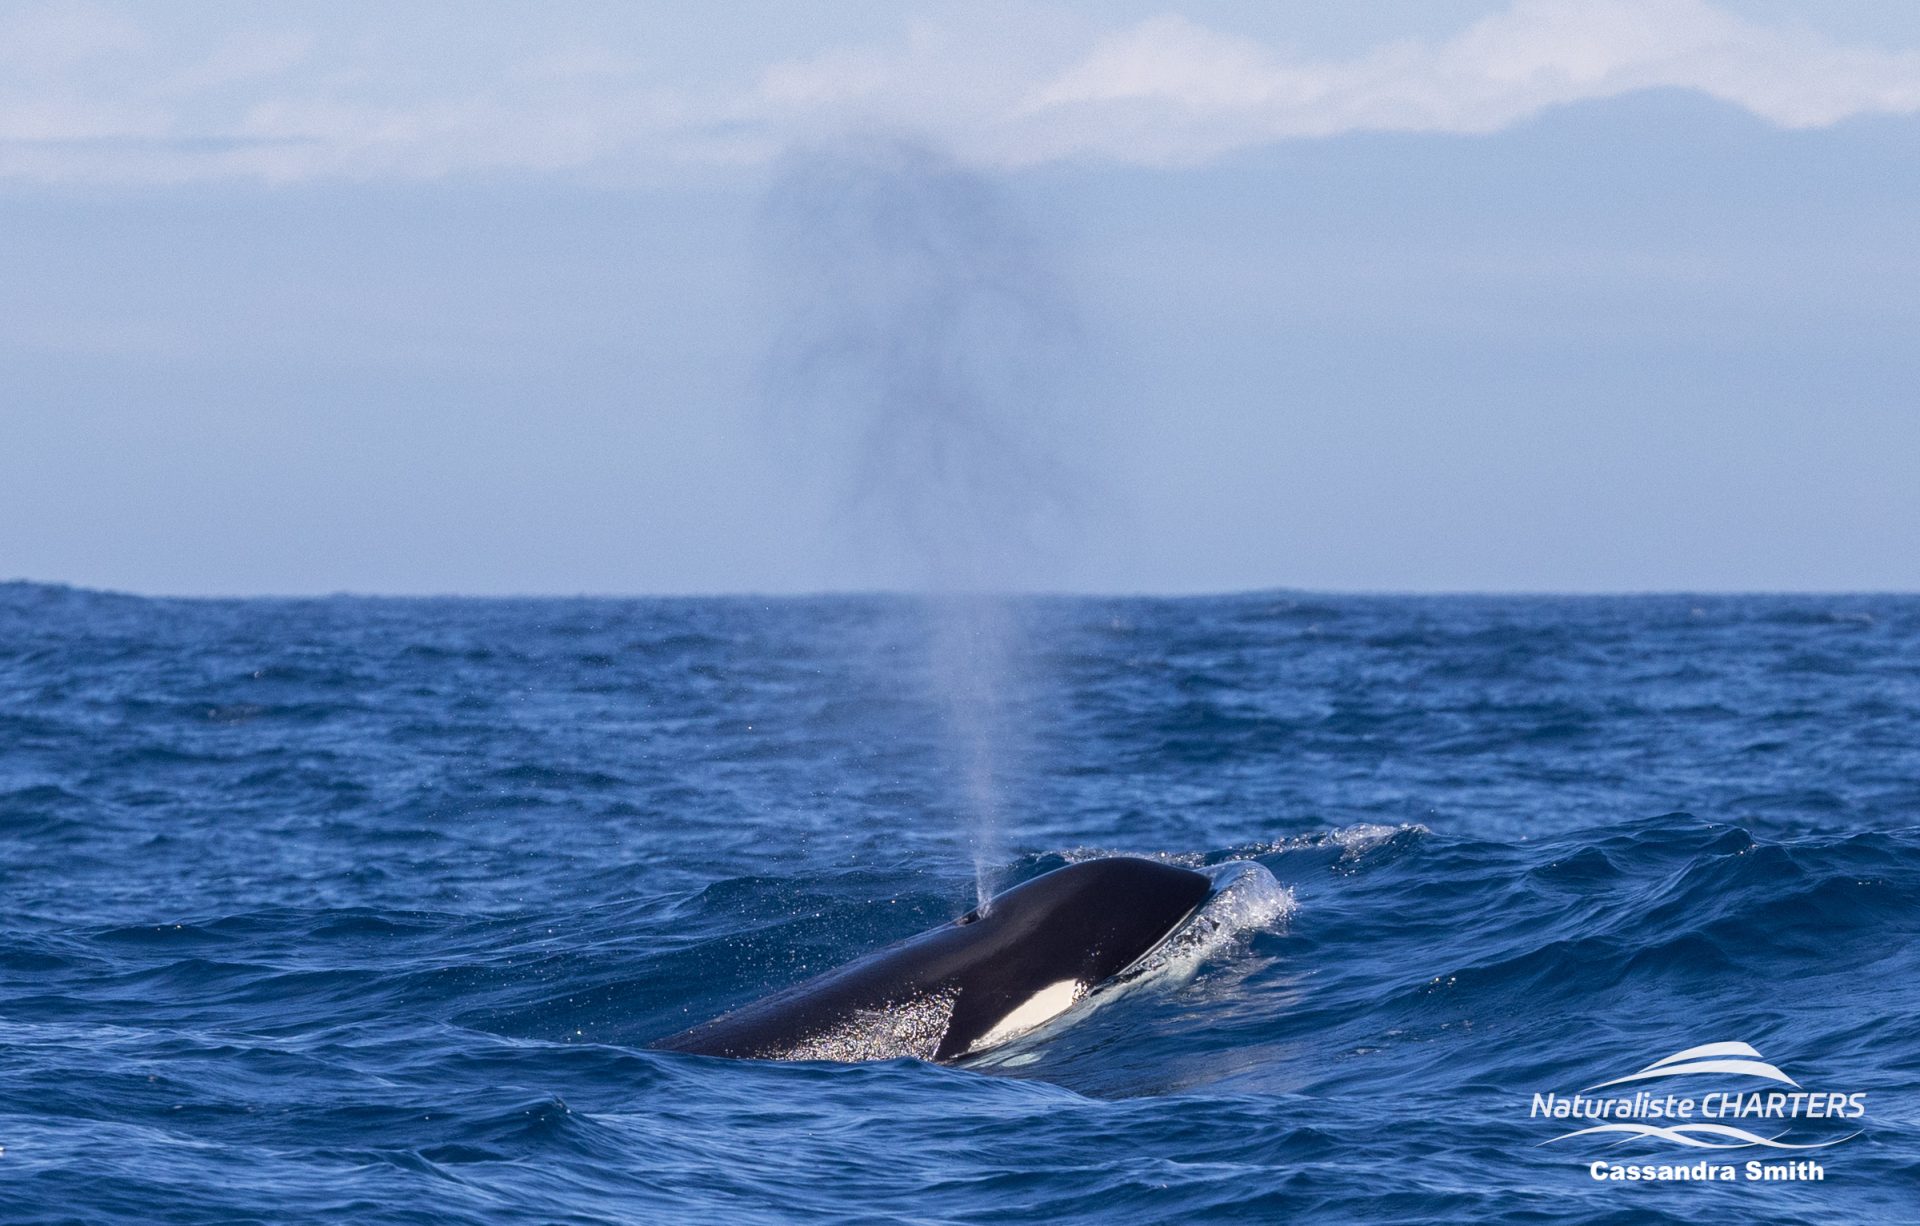 As warm air from the whale's lungs meets cold air outside, it condenses into a cloud